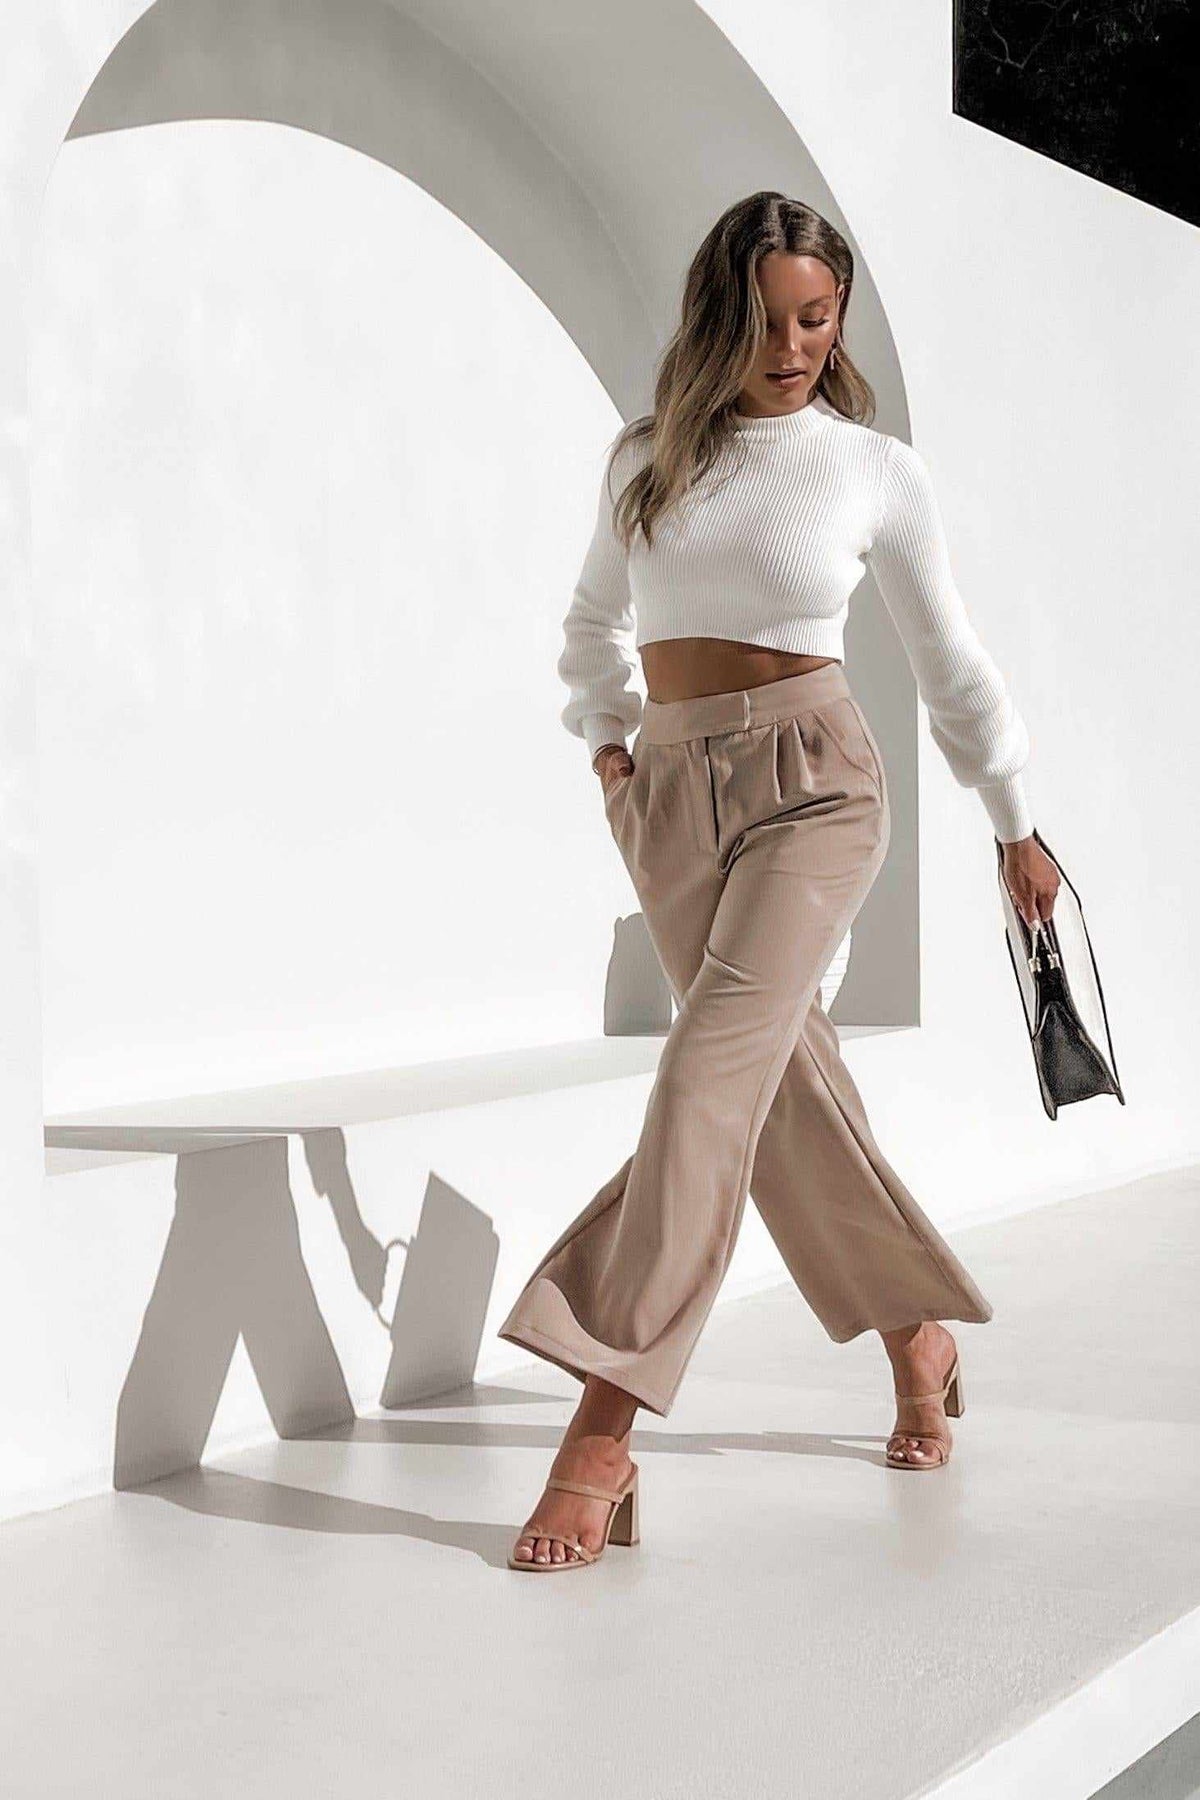 Lailia Top, BASICS, NEW ARRIVALS, NYLON, POLYESTER, TOP, VISCOSE, WHITE, Our New Lailia Top Is Now Only $50.00 Exclusive At Mishkah, We Have The Latest Fashion Accessories @ Mishkah Online Fashion Boutique Our New Lailia Top is now only $50.00-MISHKAH